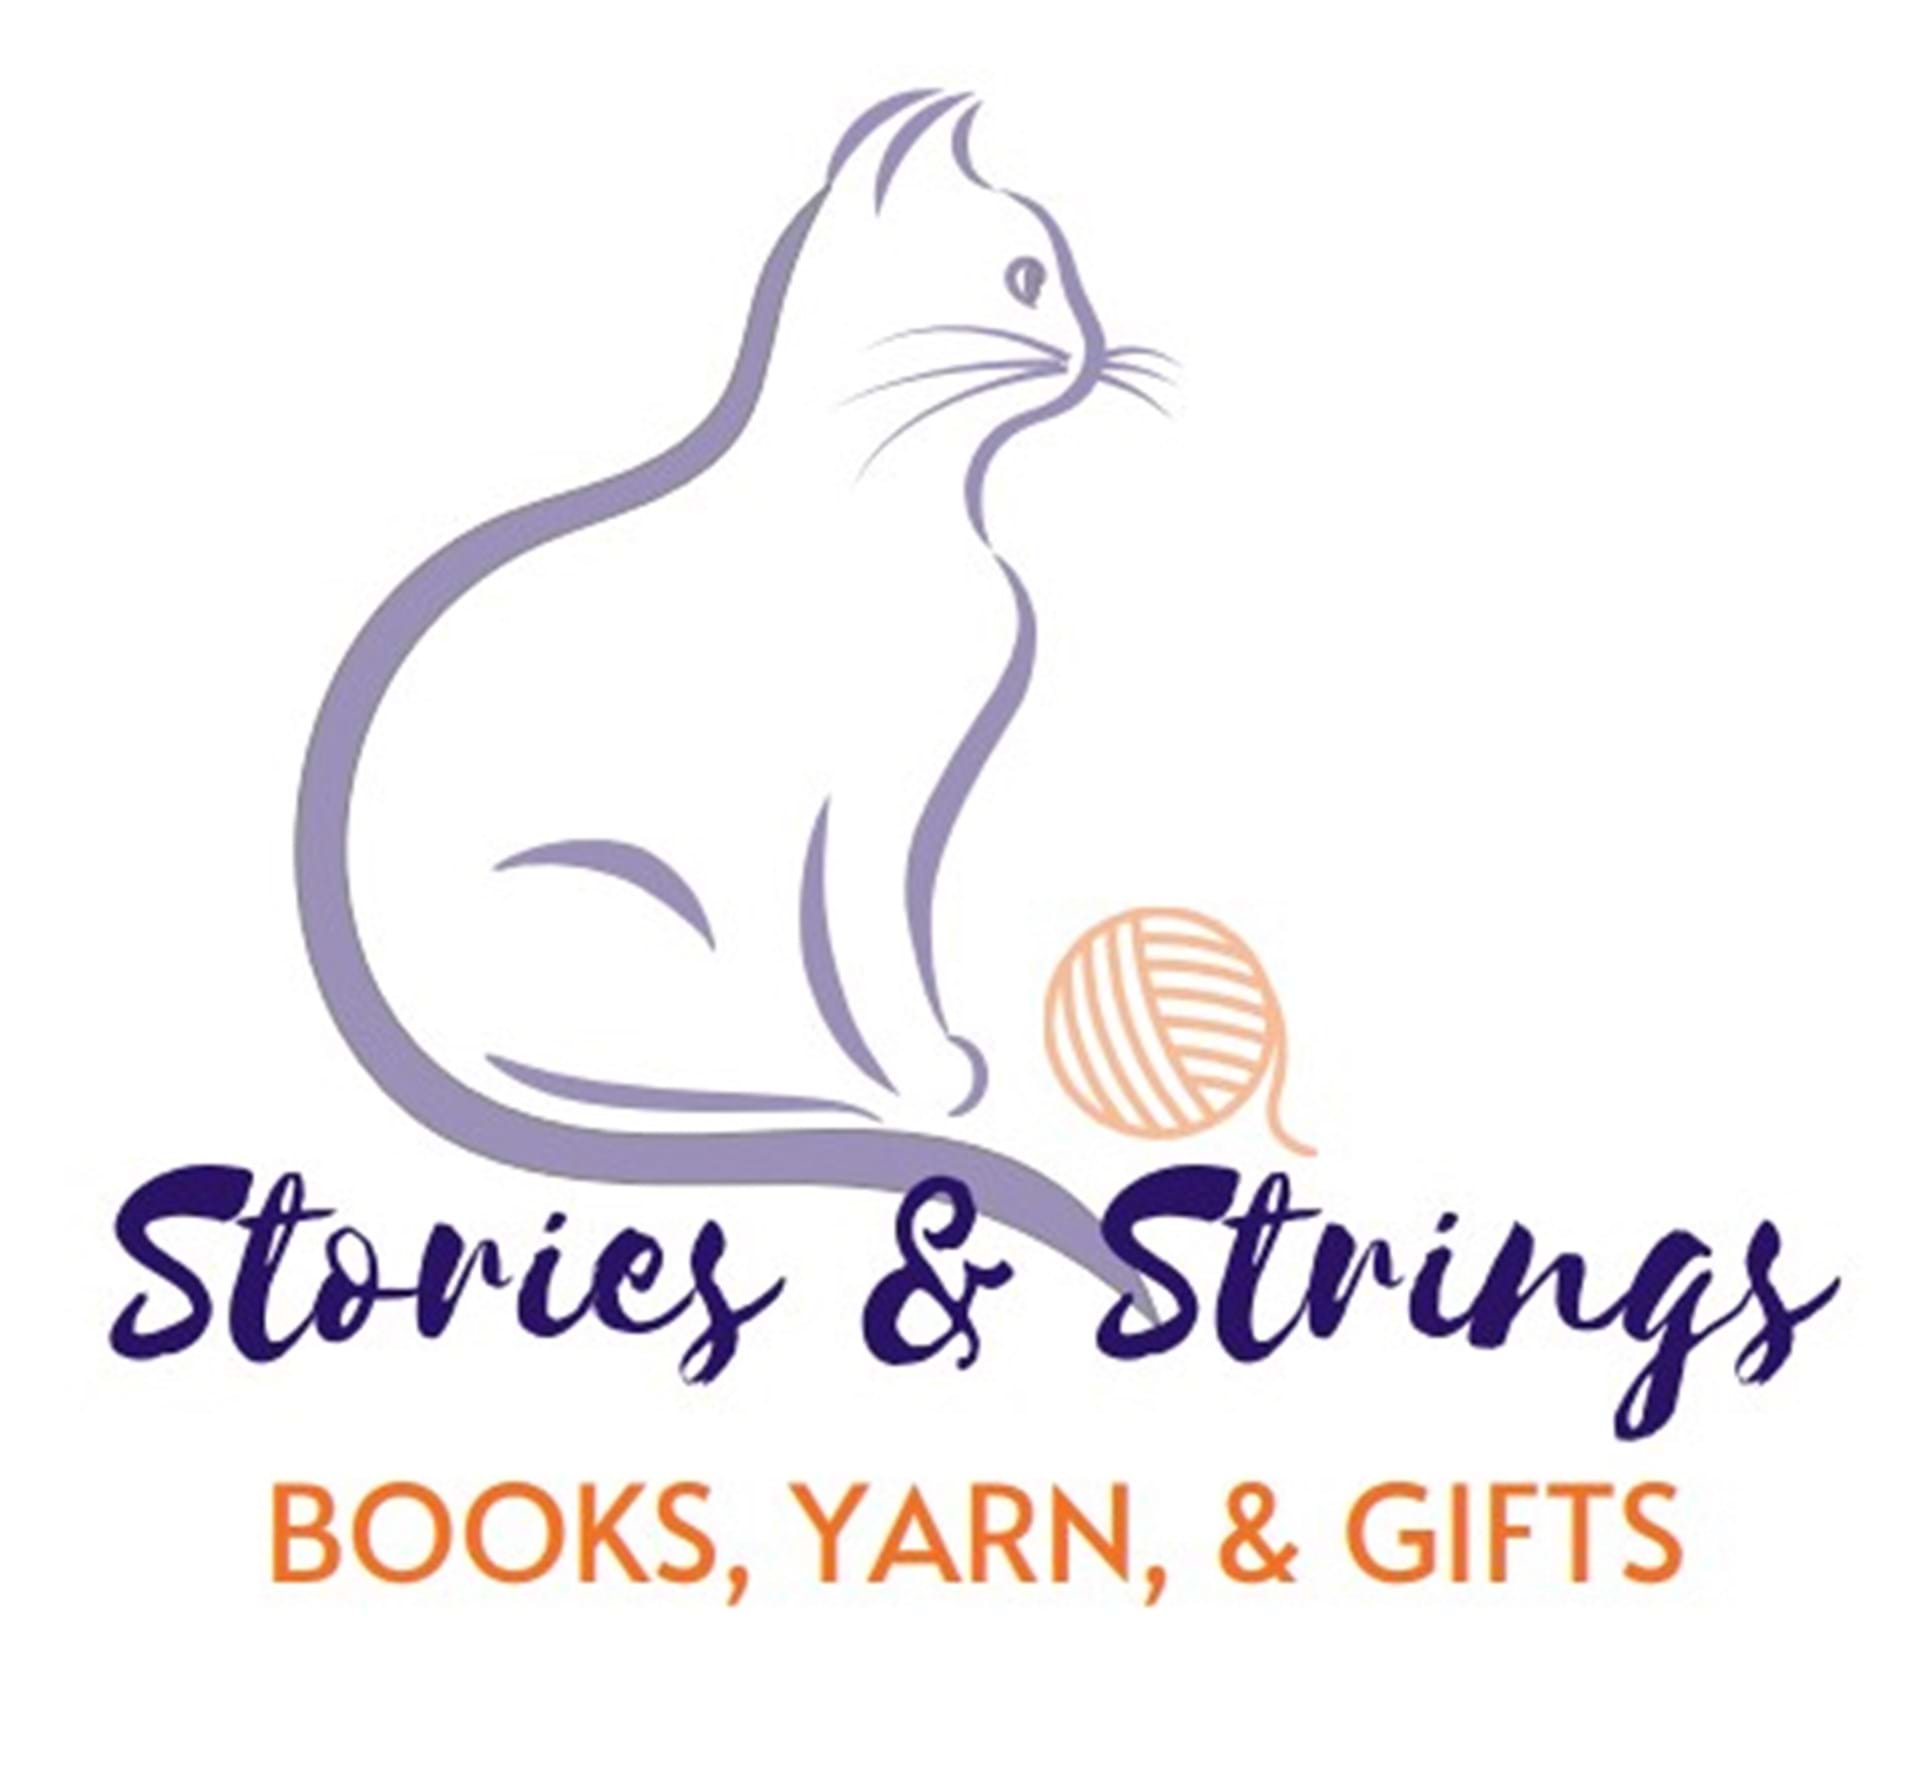 Stories & Strings is much more than a store! We offer many fibre arts classes, products, and social events! 